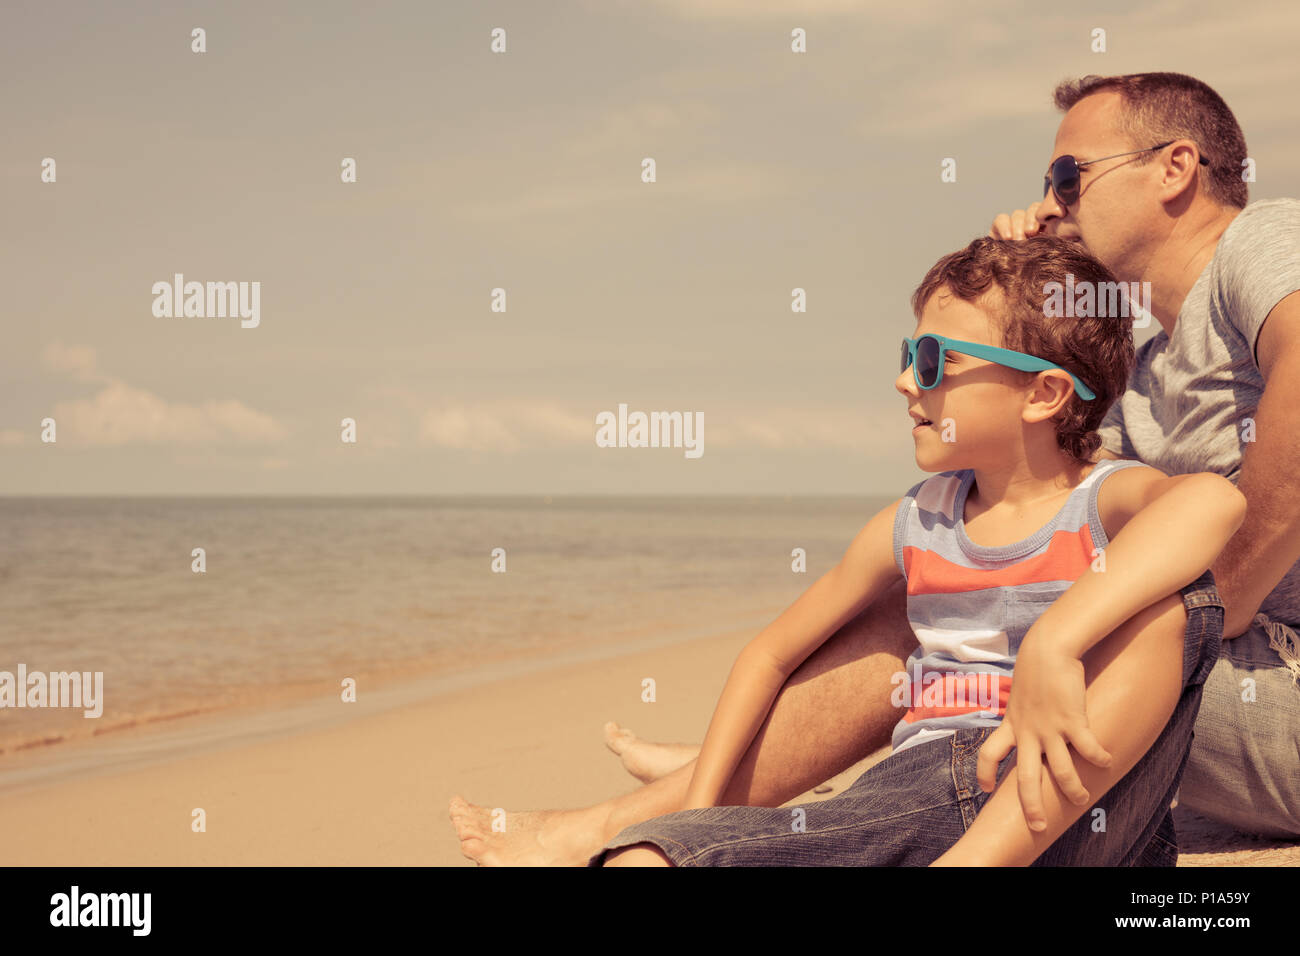 Father and  son playing on the beach at the summer day time. People having fun outdoors. Concept of summer vacation and friendly family. Stock Photo